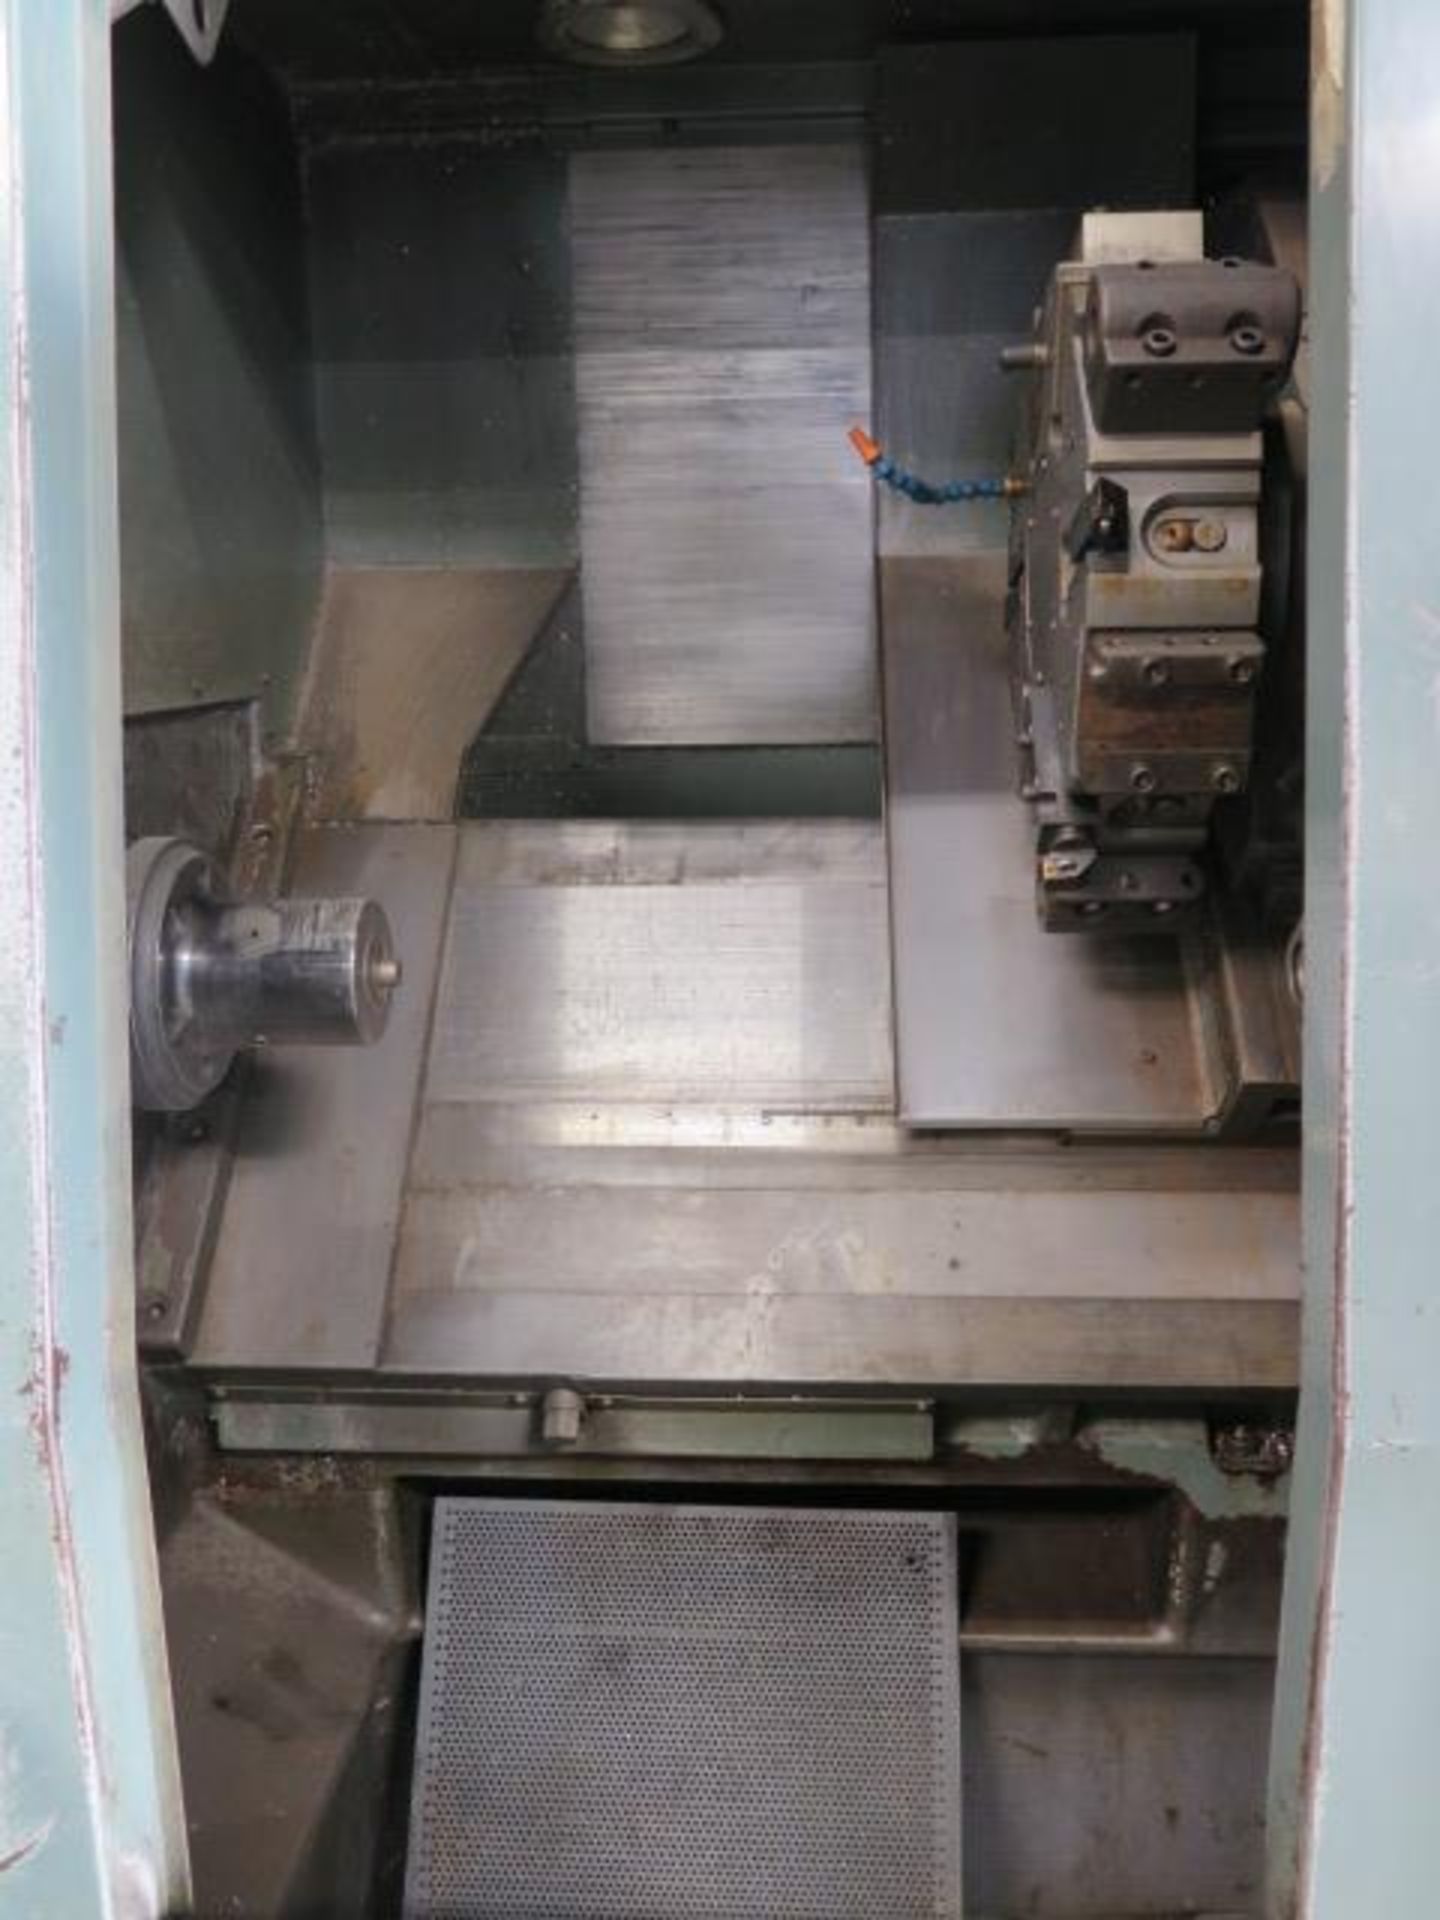 Mori Seiki SL-3H CNC Turning Center s/n 5331 w/ Yasnac Controls, 12-Station Turret, SOLD AS IS - Image 9 of 15